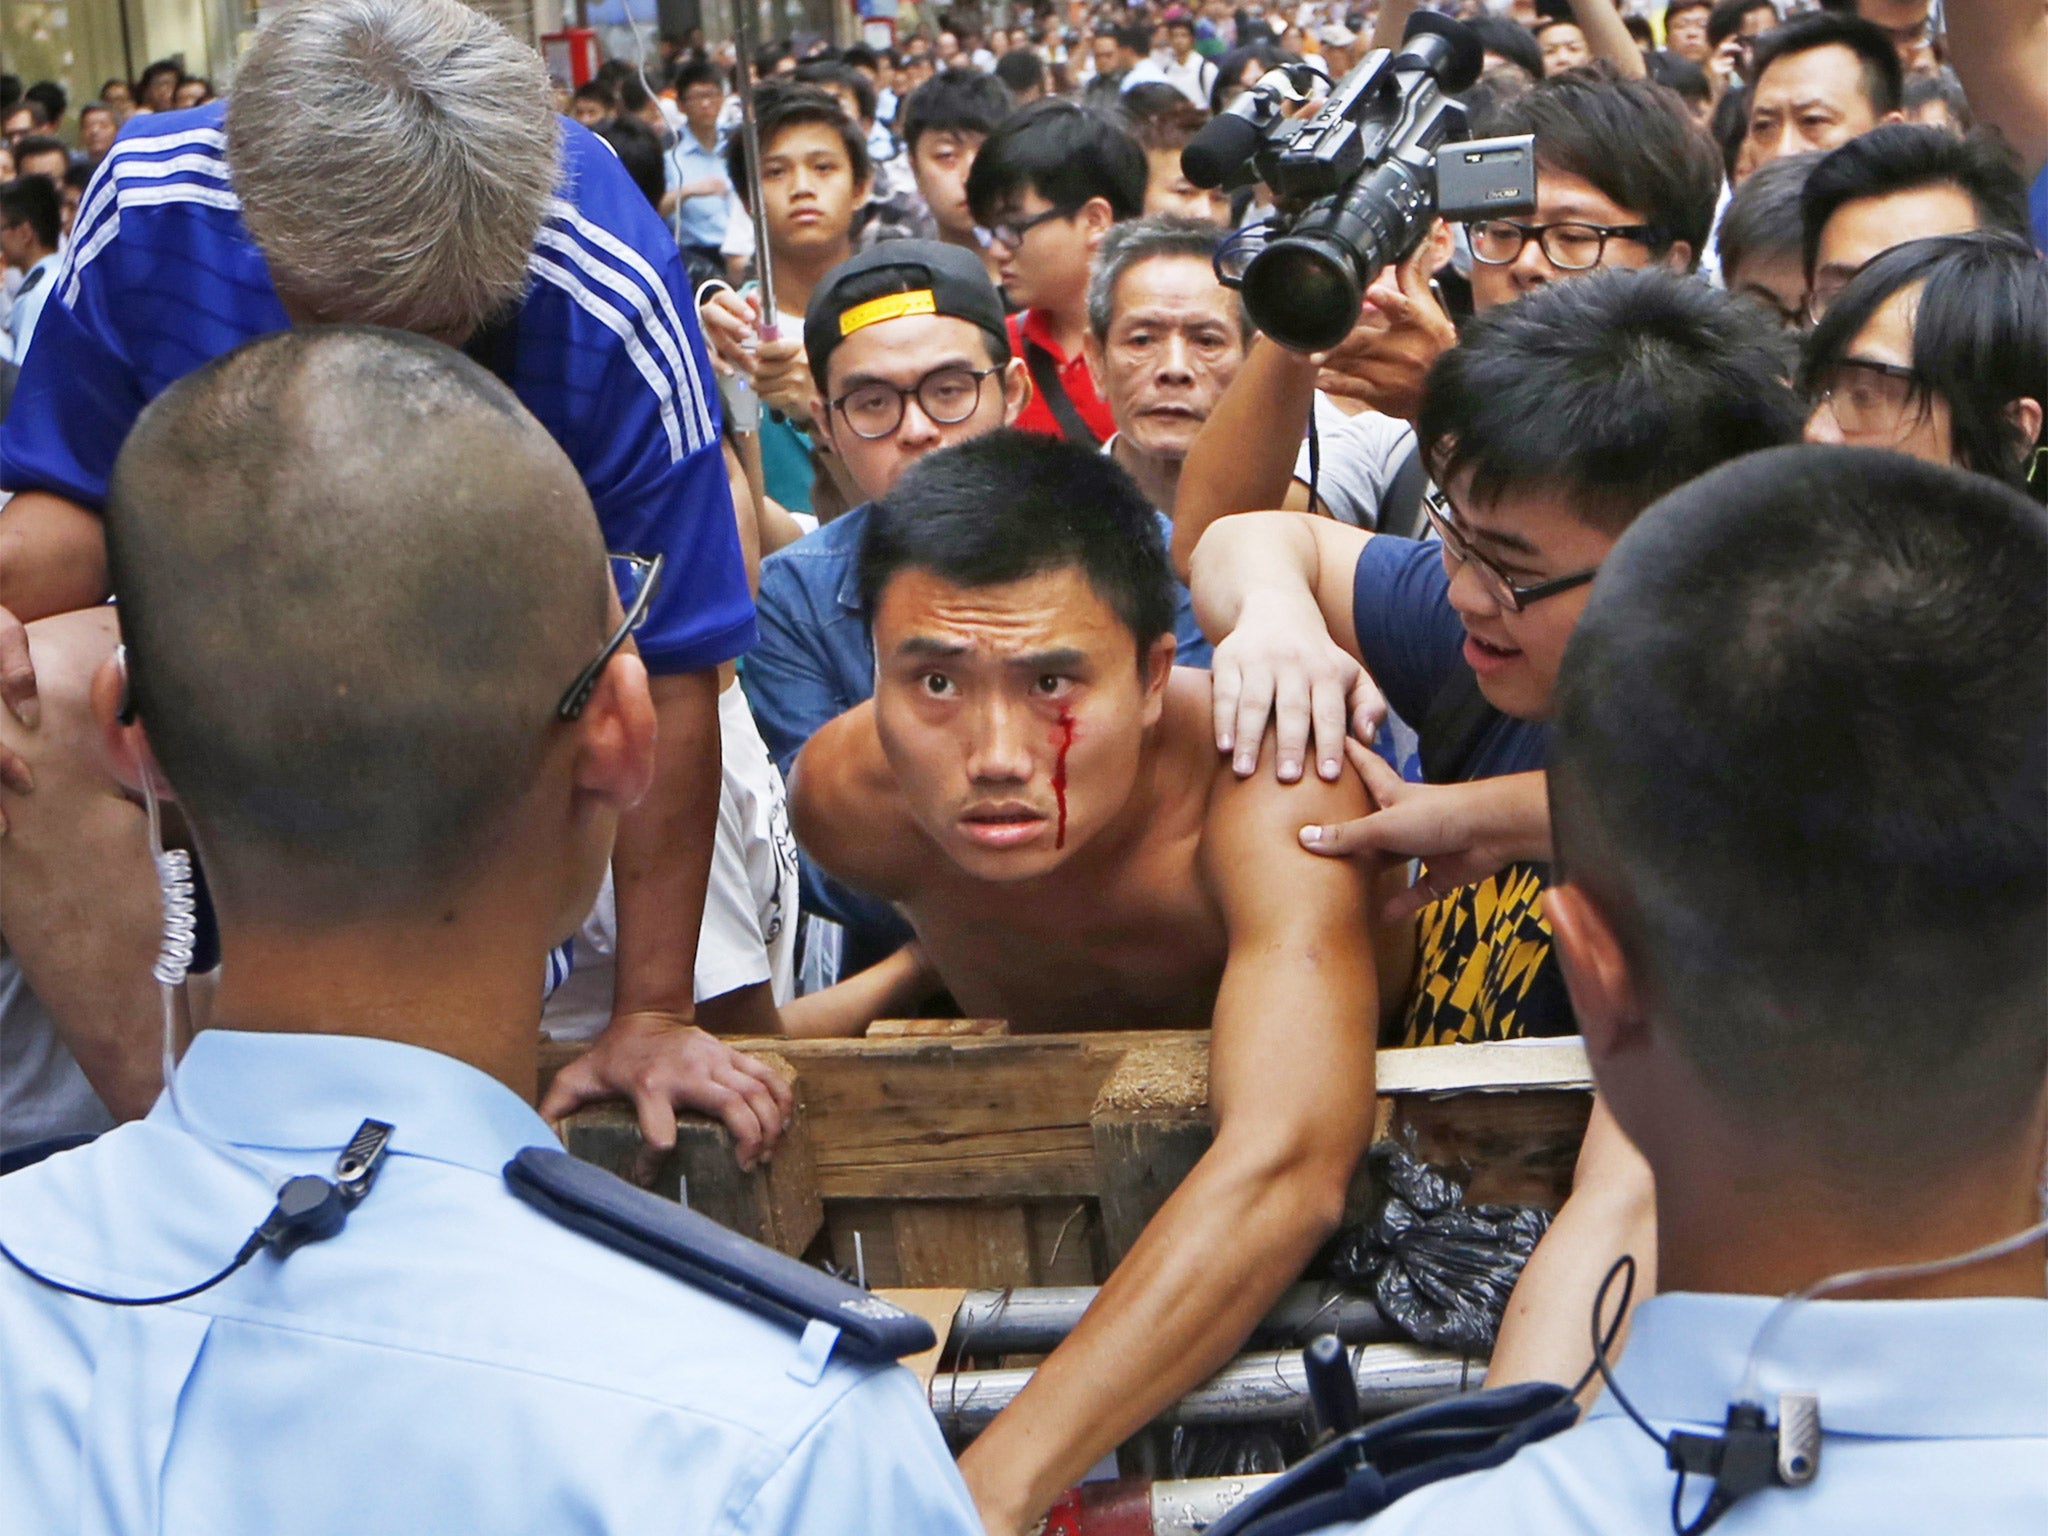 Police try to calm a clash between protesters and taxi drivers at a barricade in the Mong Kok district